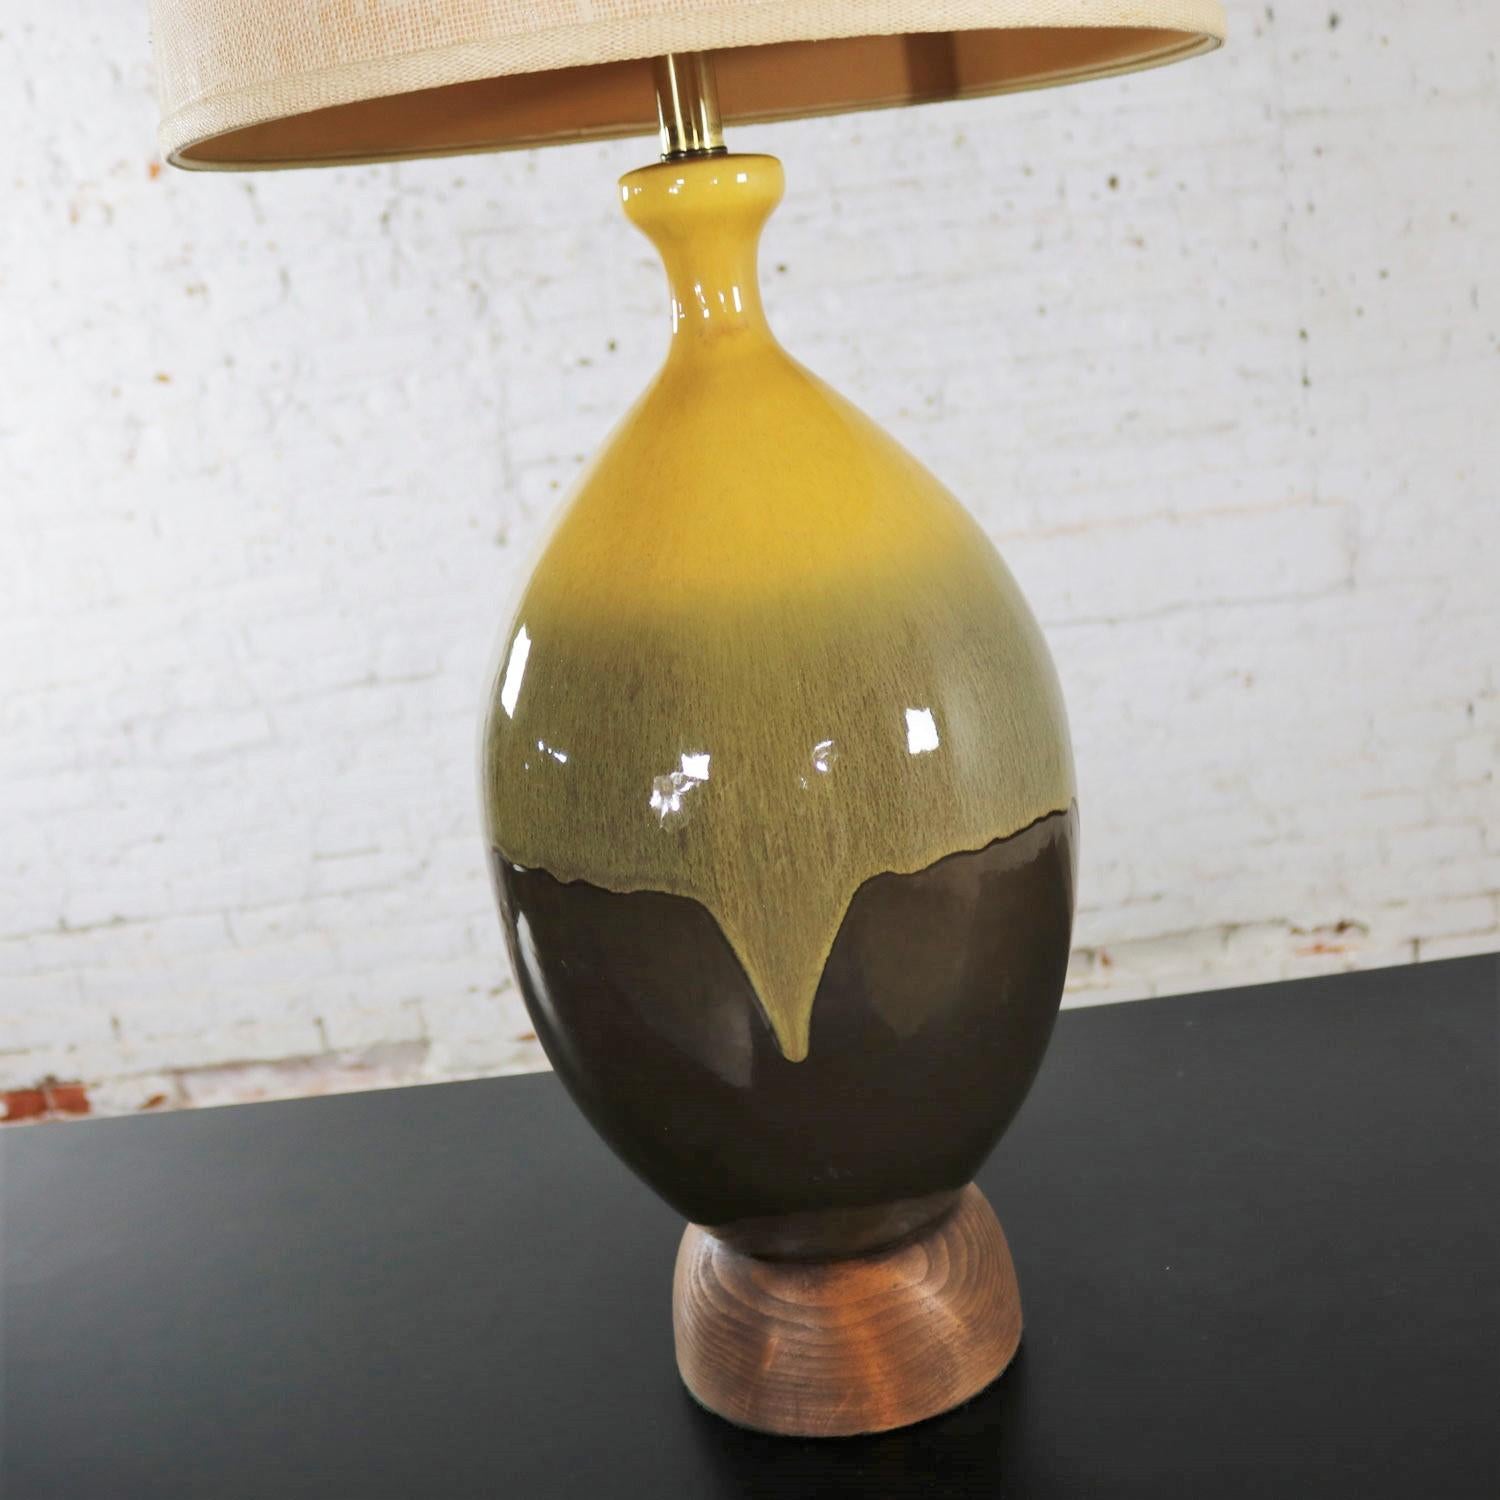 Large Mid-Century Modern Ceramic Table Lamp Brown and Golden Yellow Drip Glaze In Good Condition For Sale In Topeka, KS